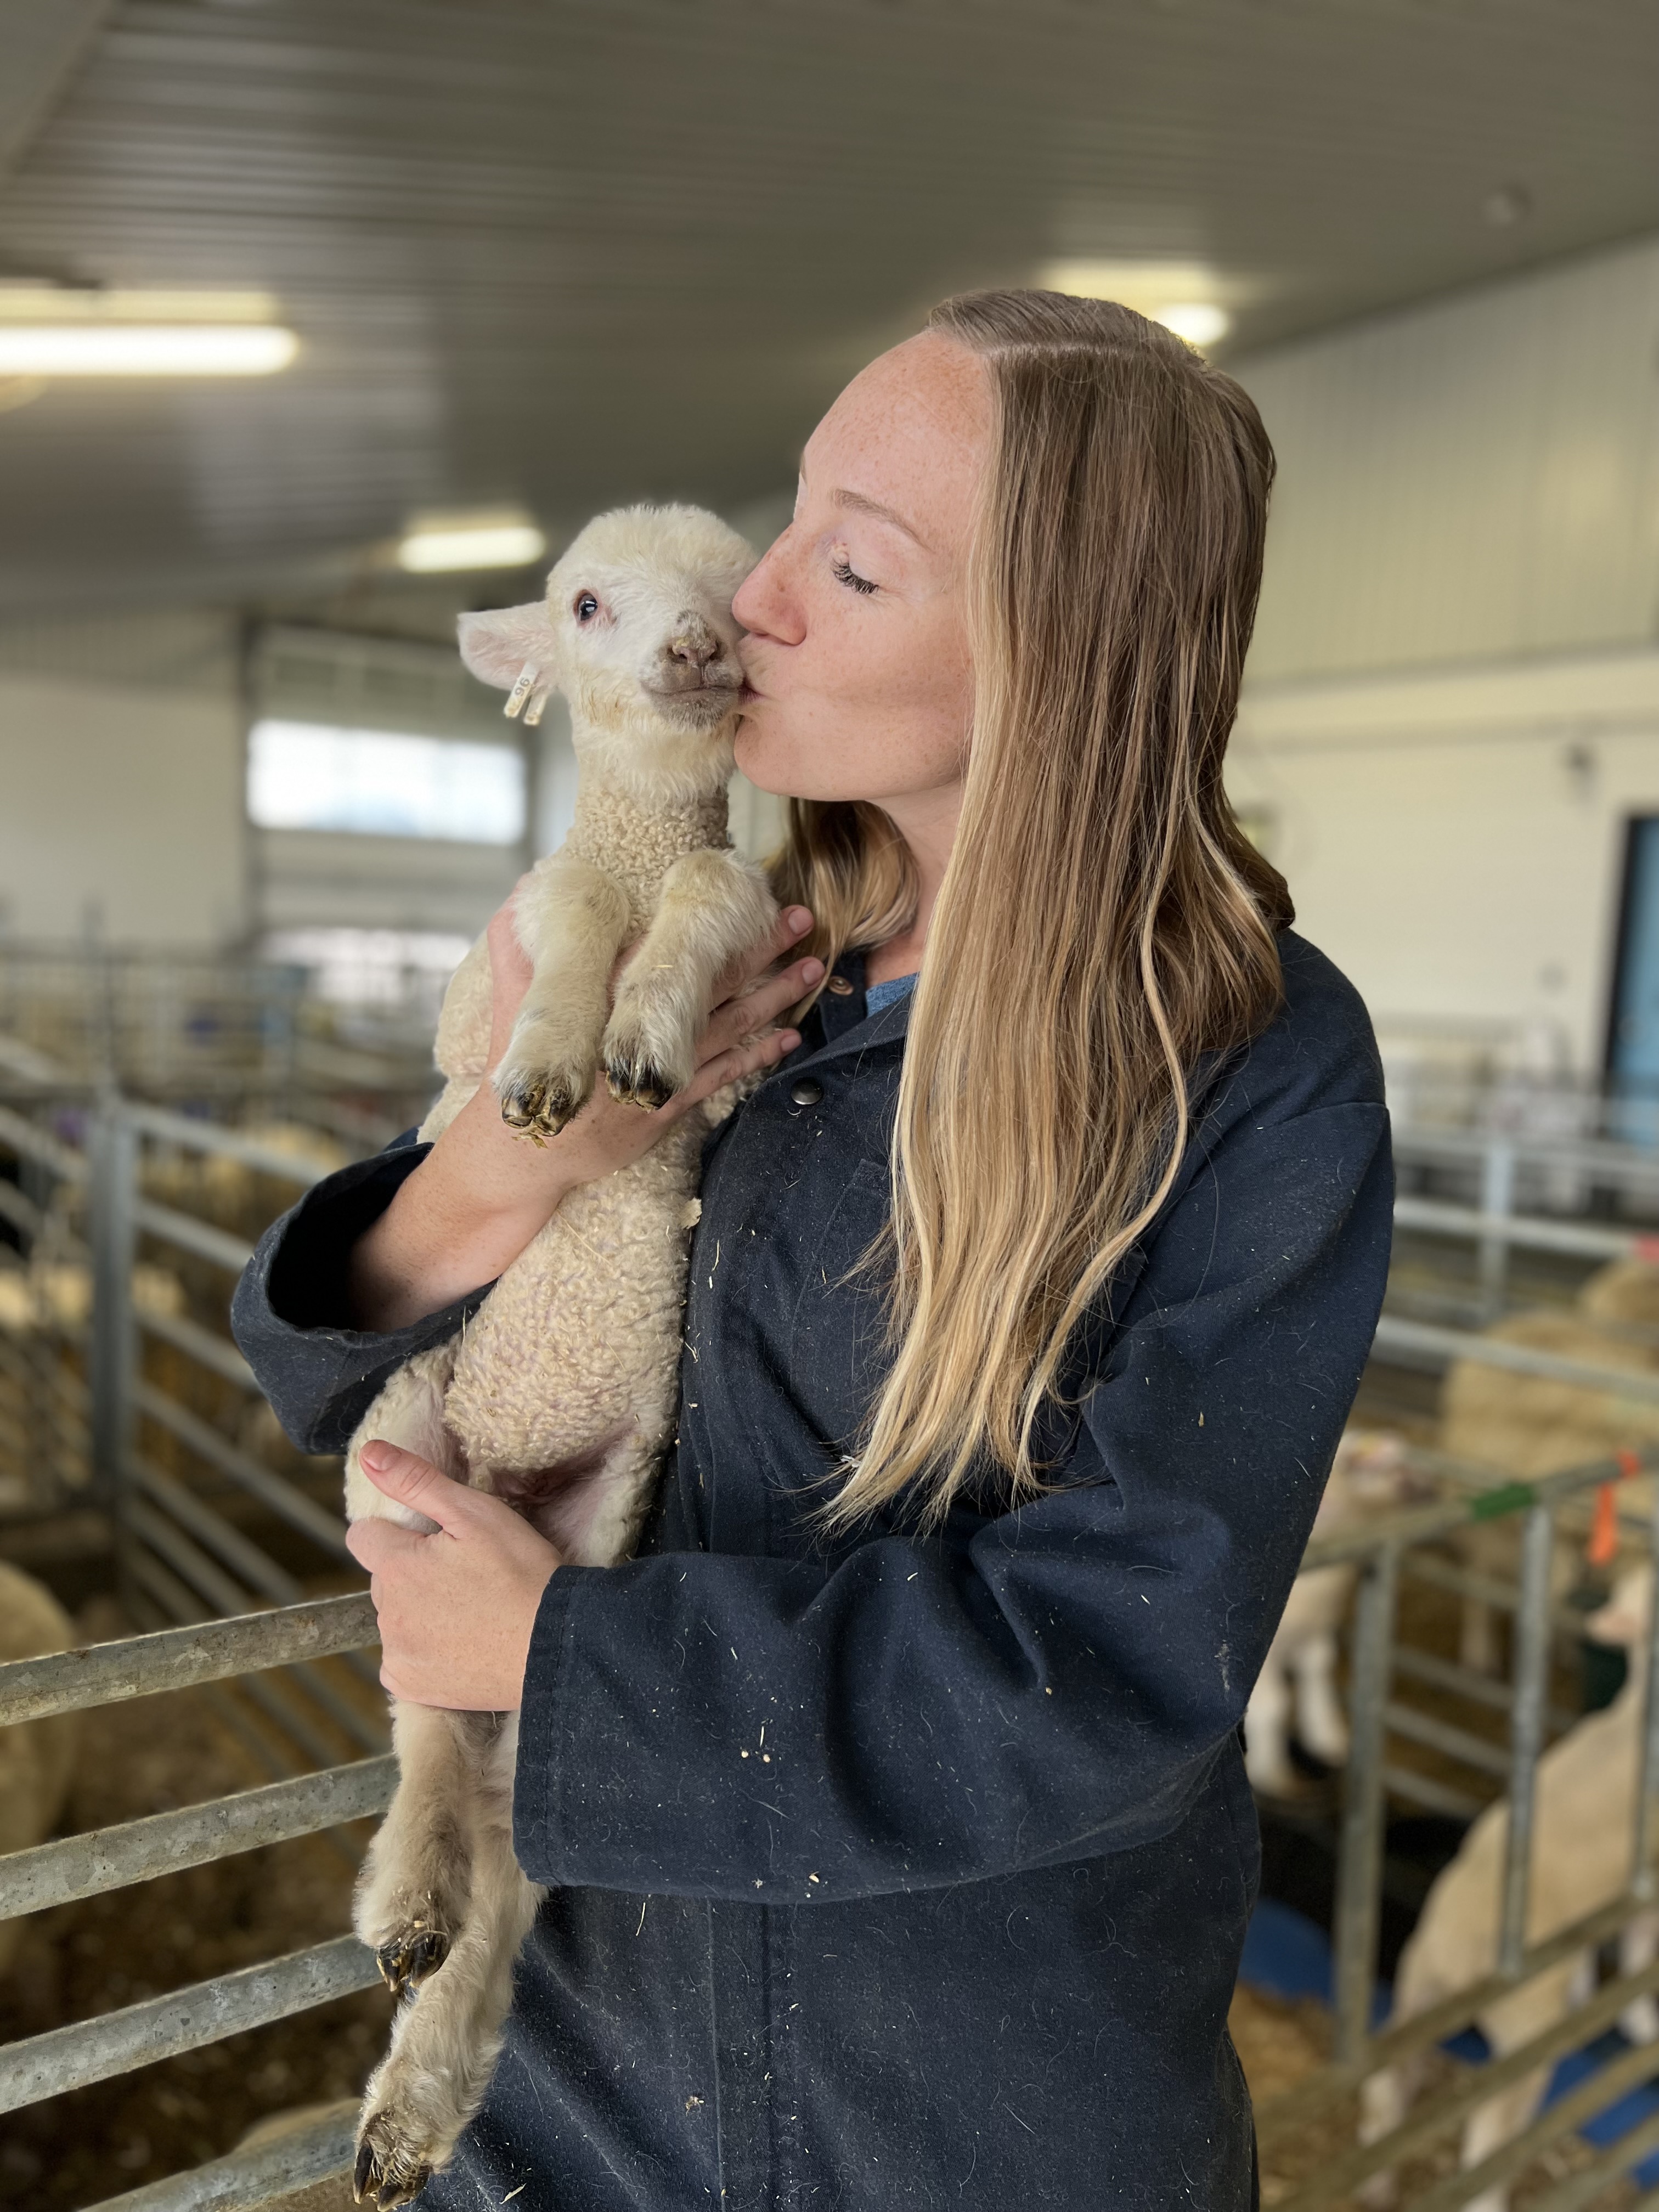 Researcher in coveralls giving a 10 day old white lamb a kiss on the nose 